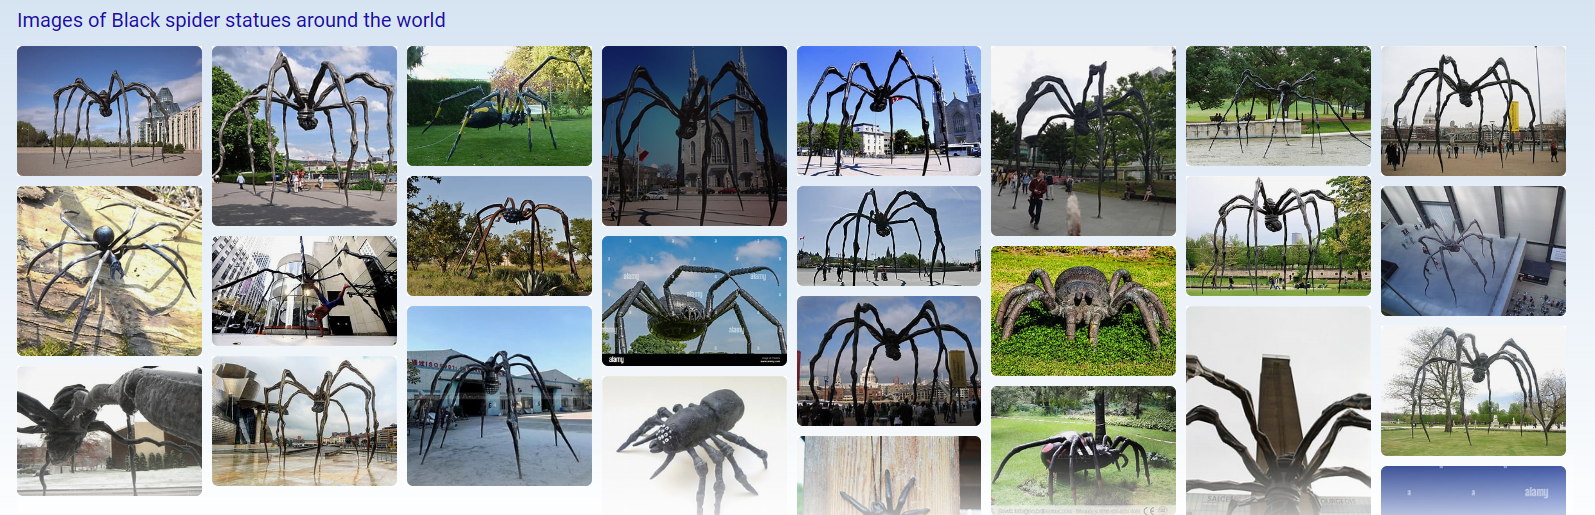 Large Archon Spider Statues Around The World 